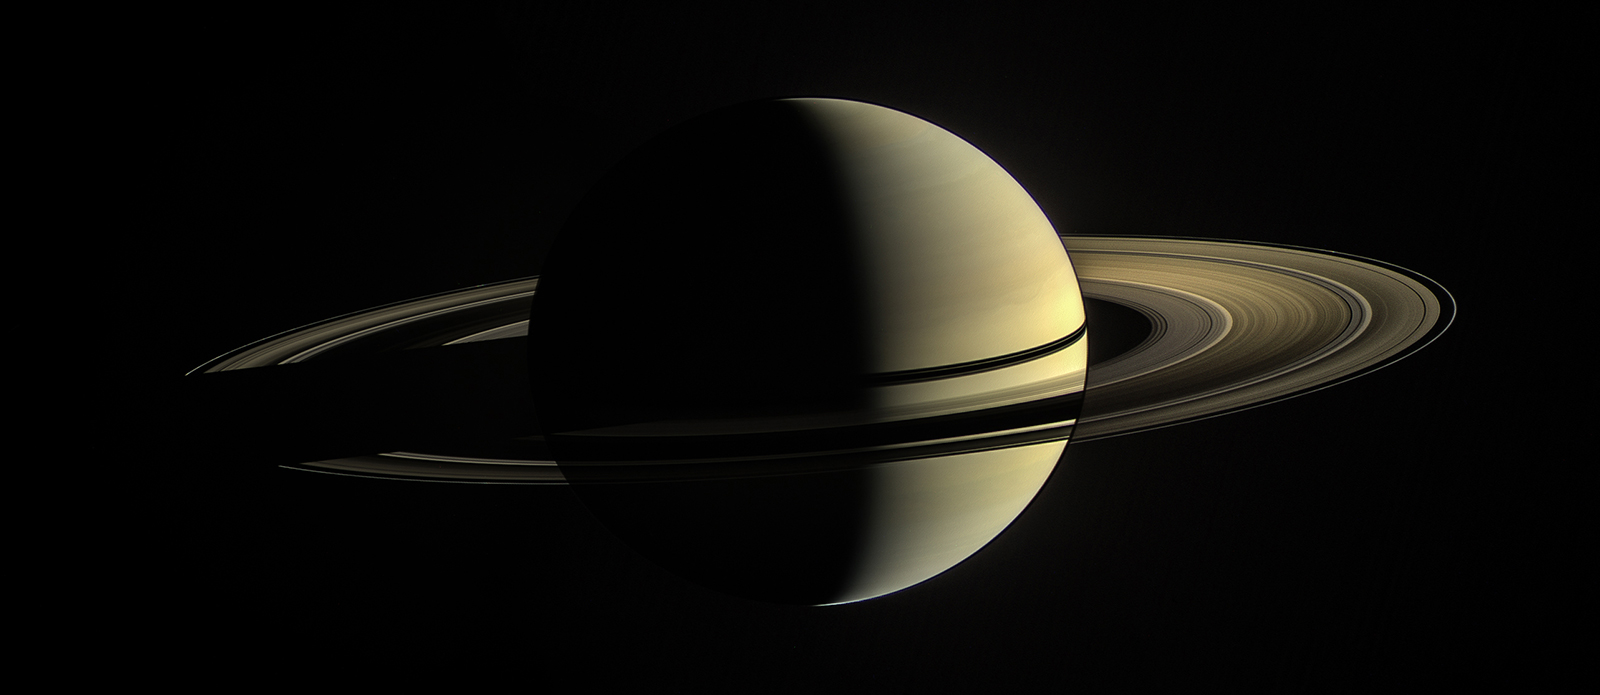 Saturn’s rings could have evolved from debris of two icy moons